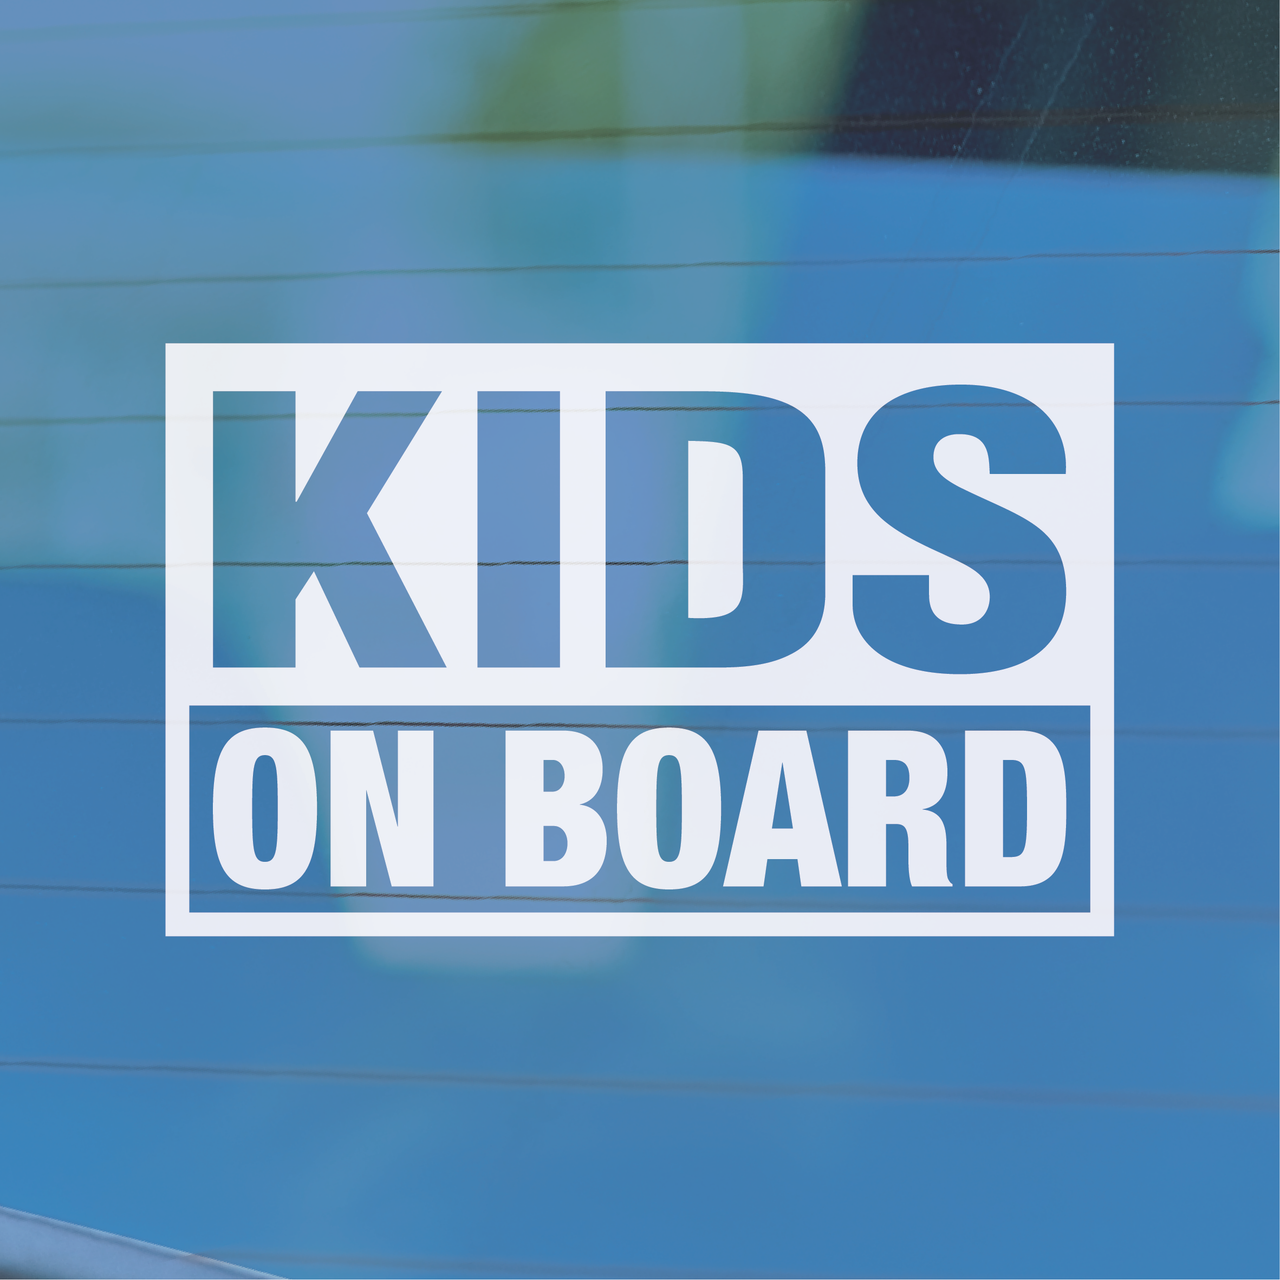 Child On Board Car Decal